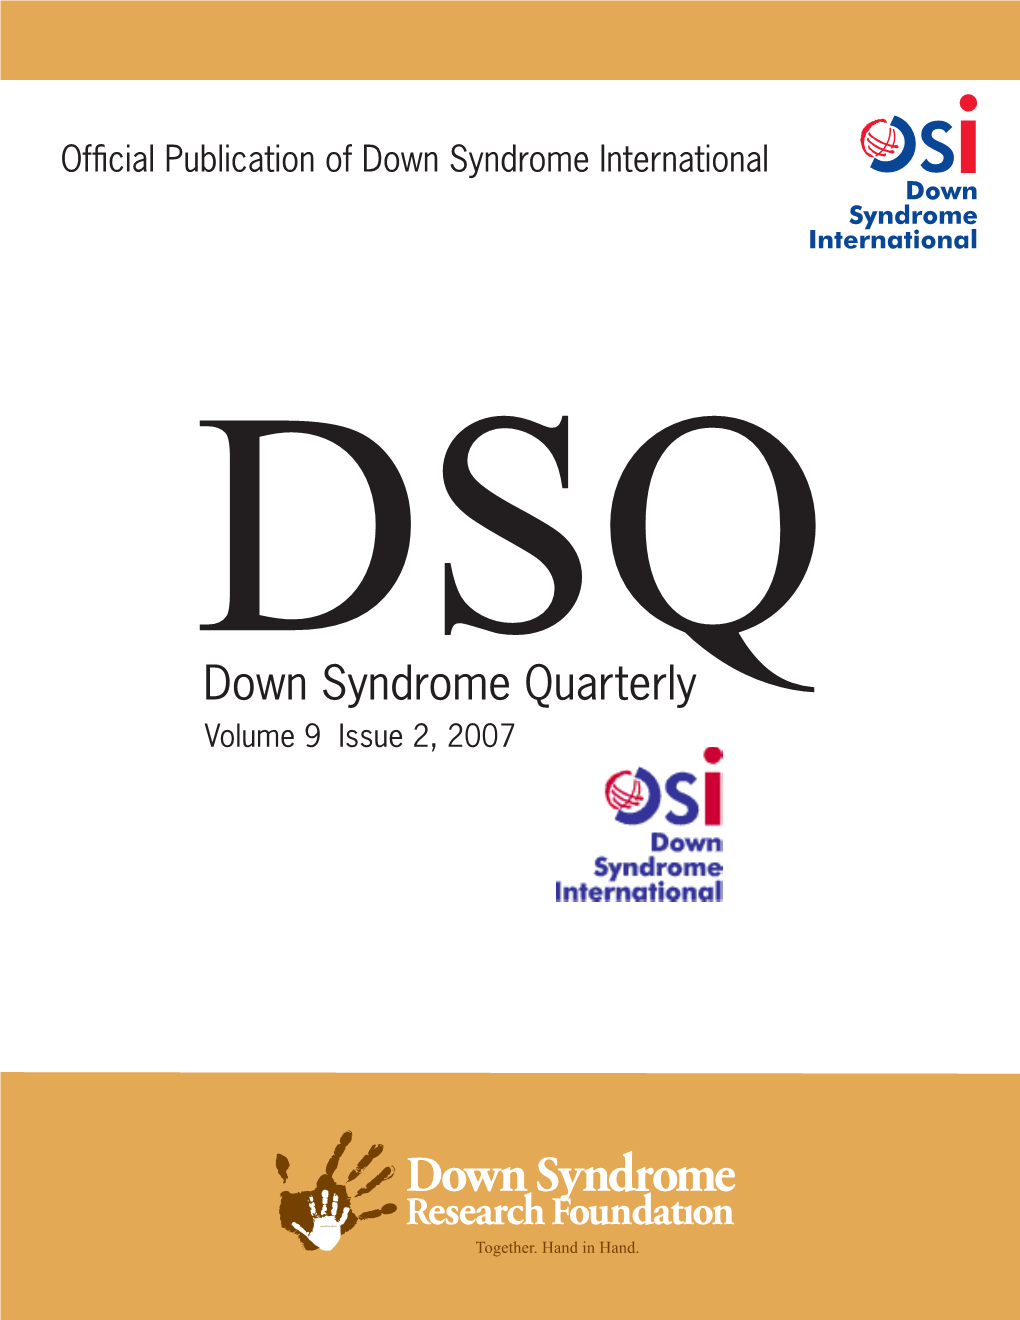 Down Syndrome Quarterly Volume 9 Issue 2, 2007